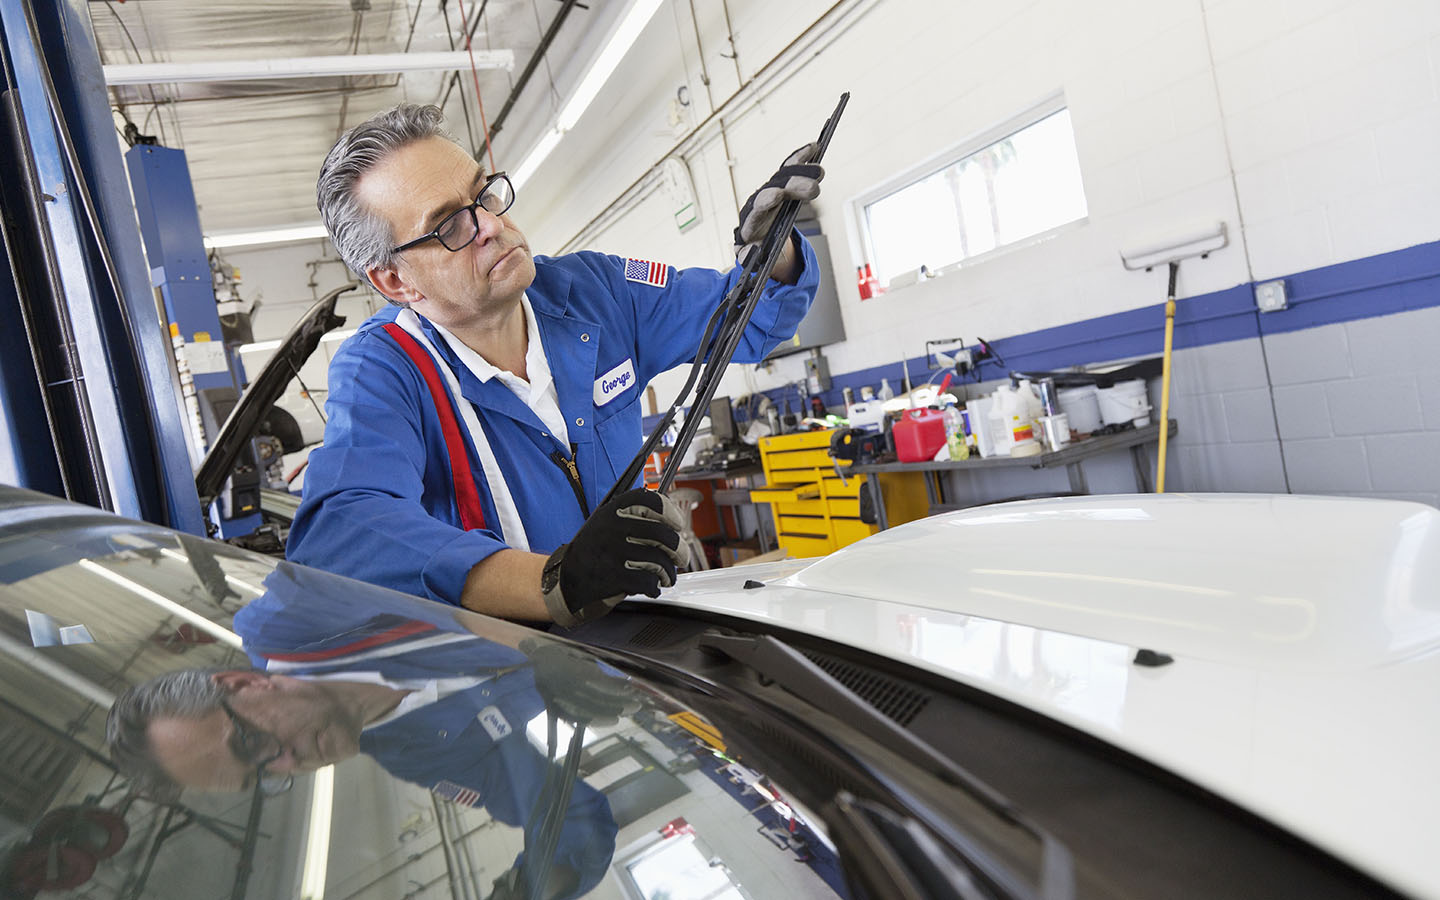 Auto expert routinely checking the car wiper blades